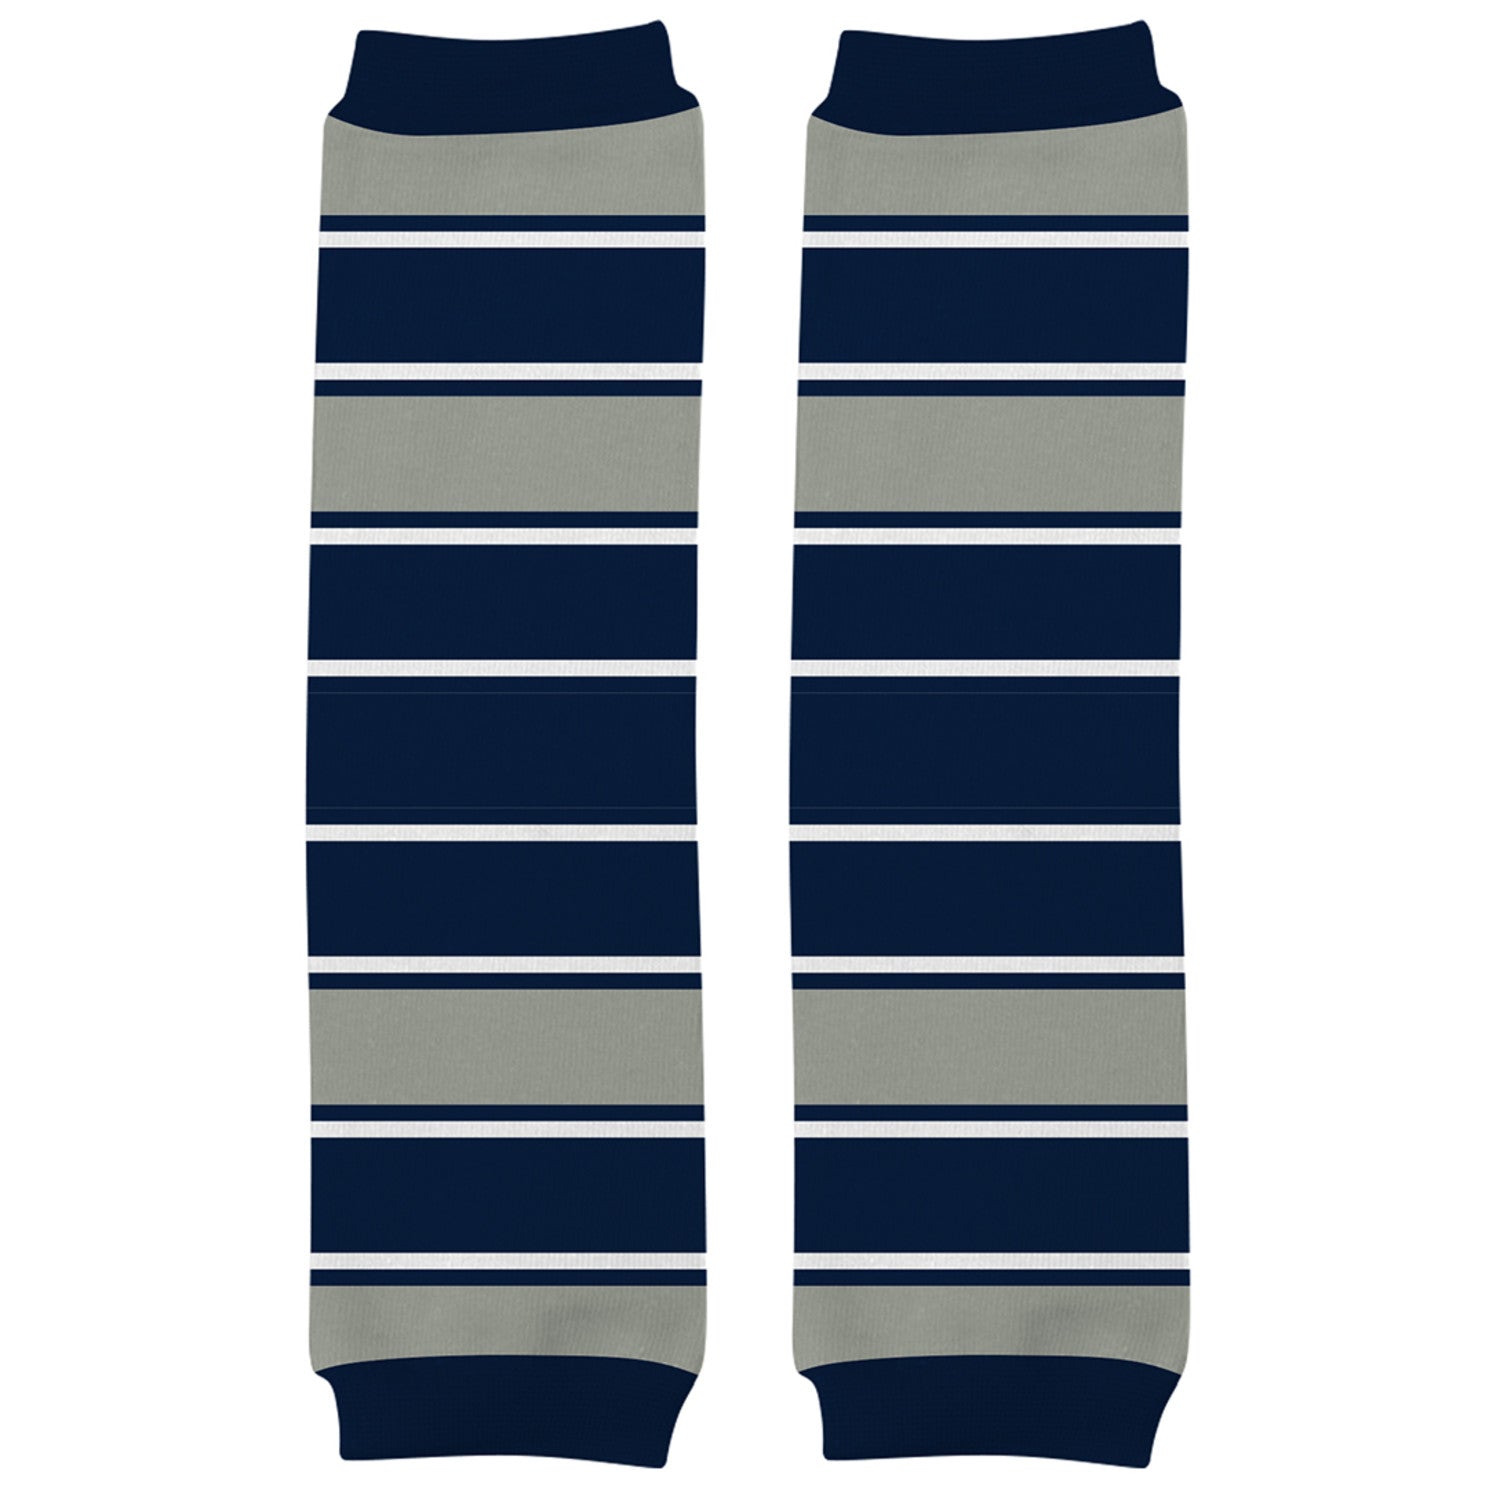 Penn State Nittany Lions Baby Leg Warmers